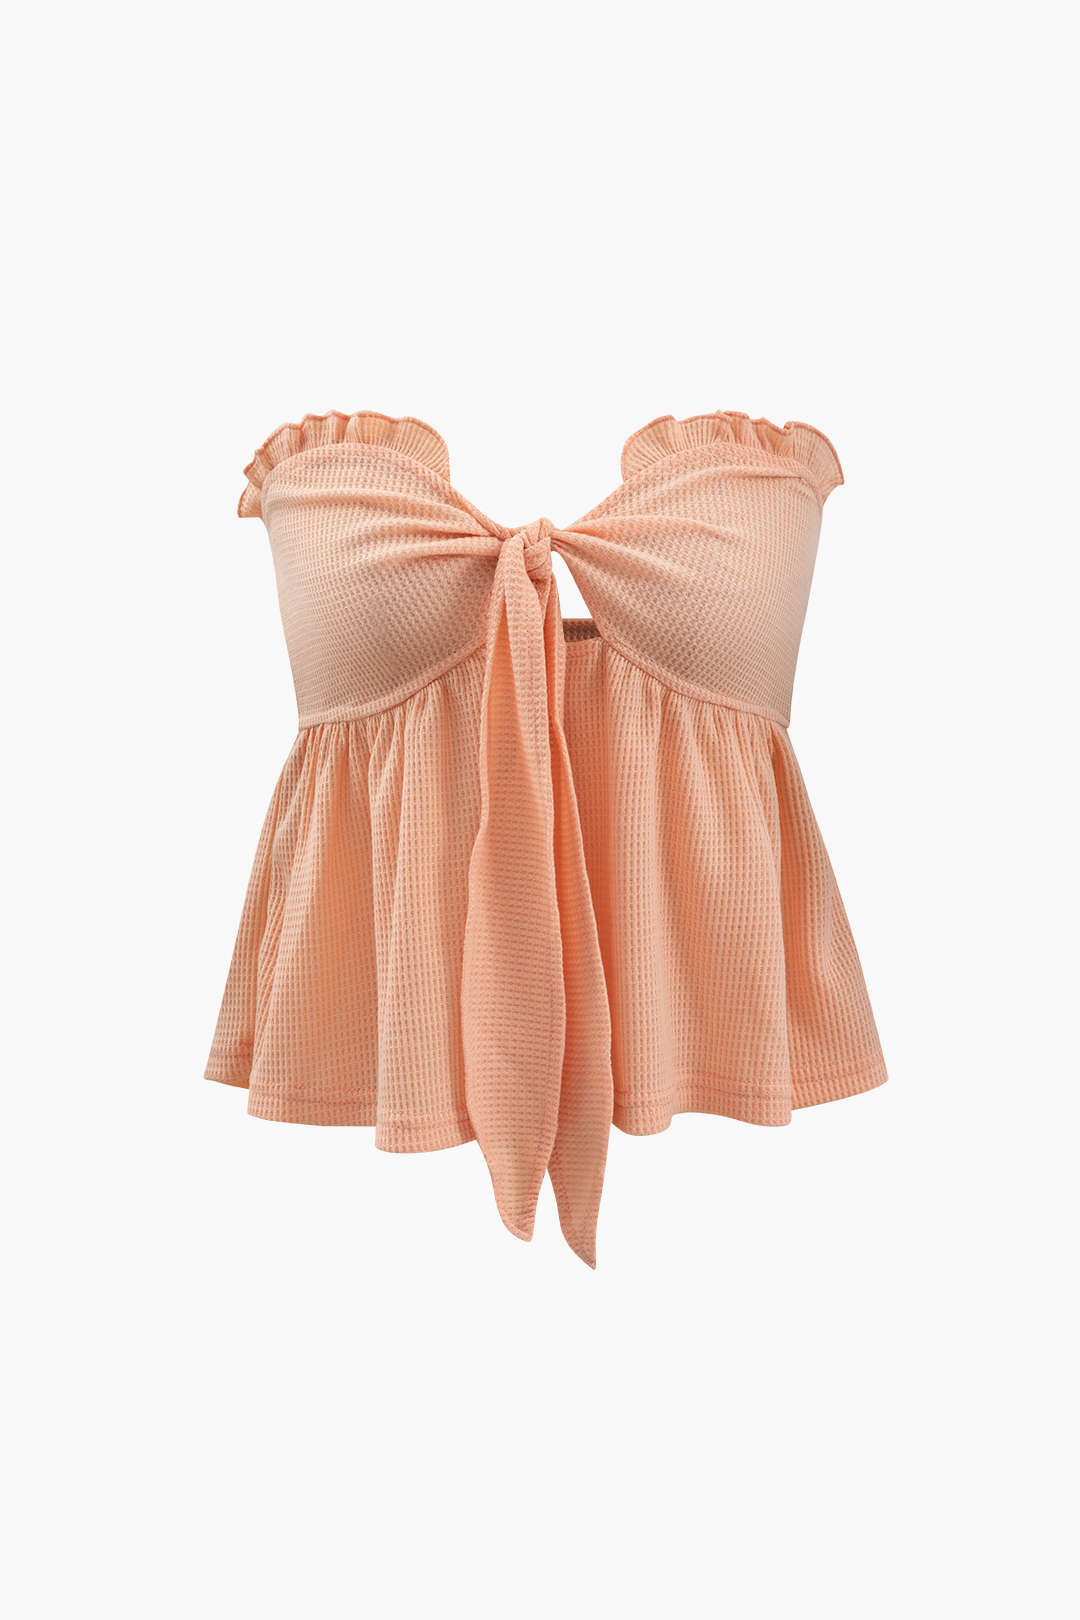 Frill Trim Knot Front Tube Top